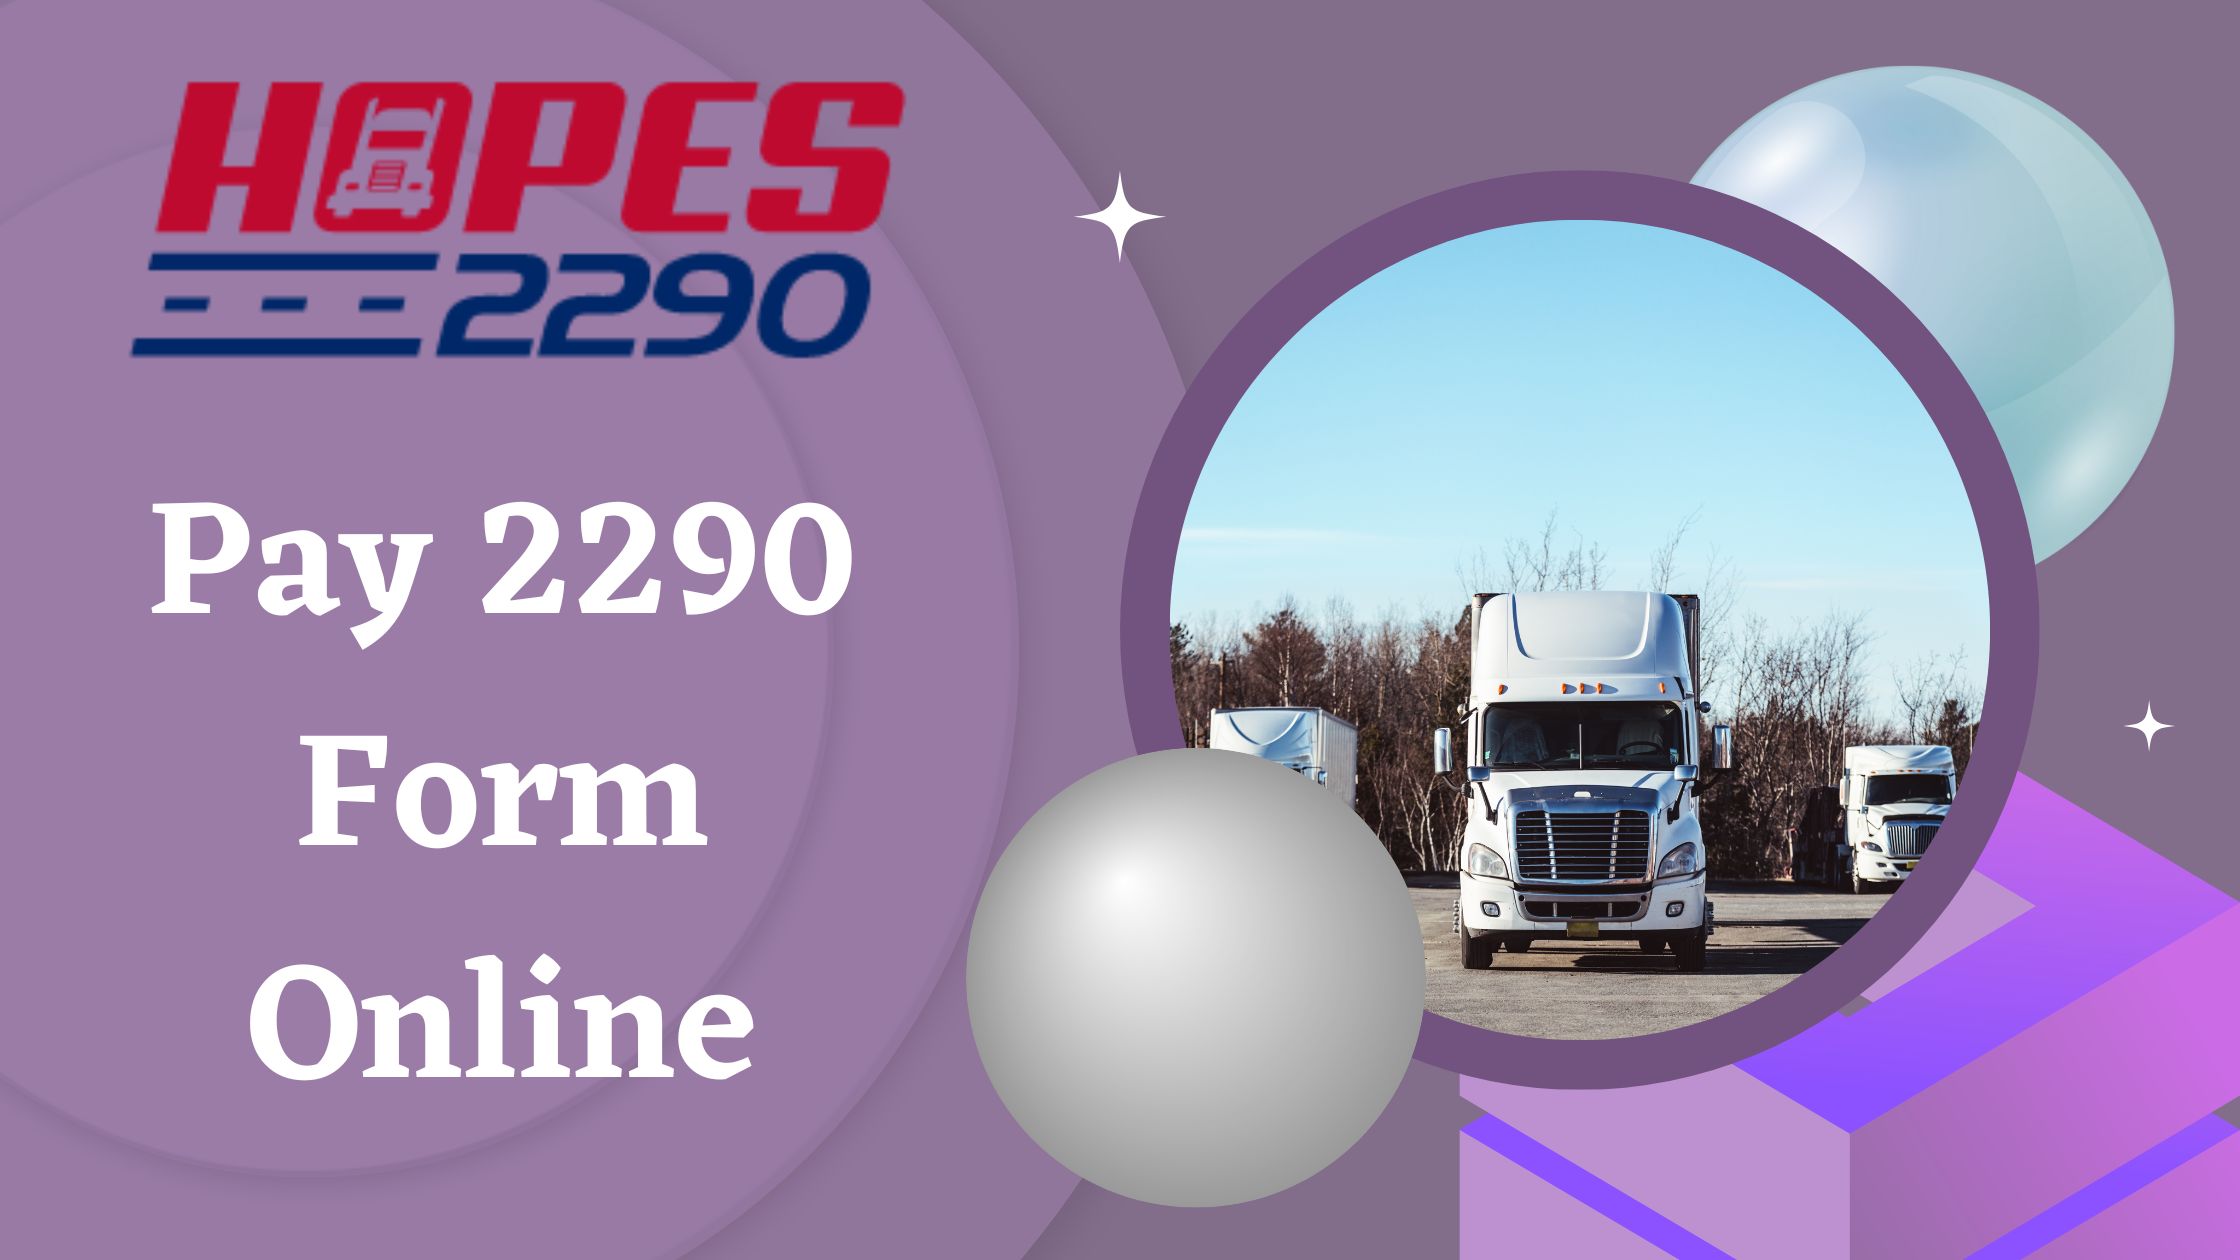 PAY 2290 FORM ONLINE